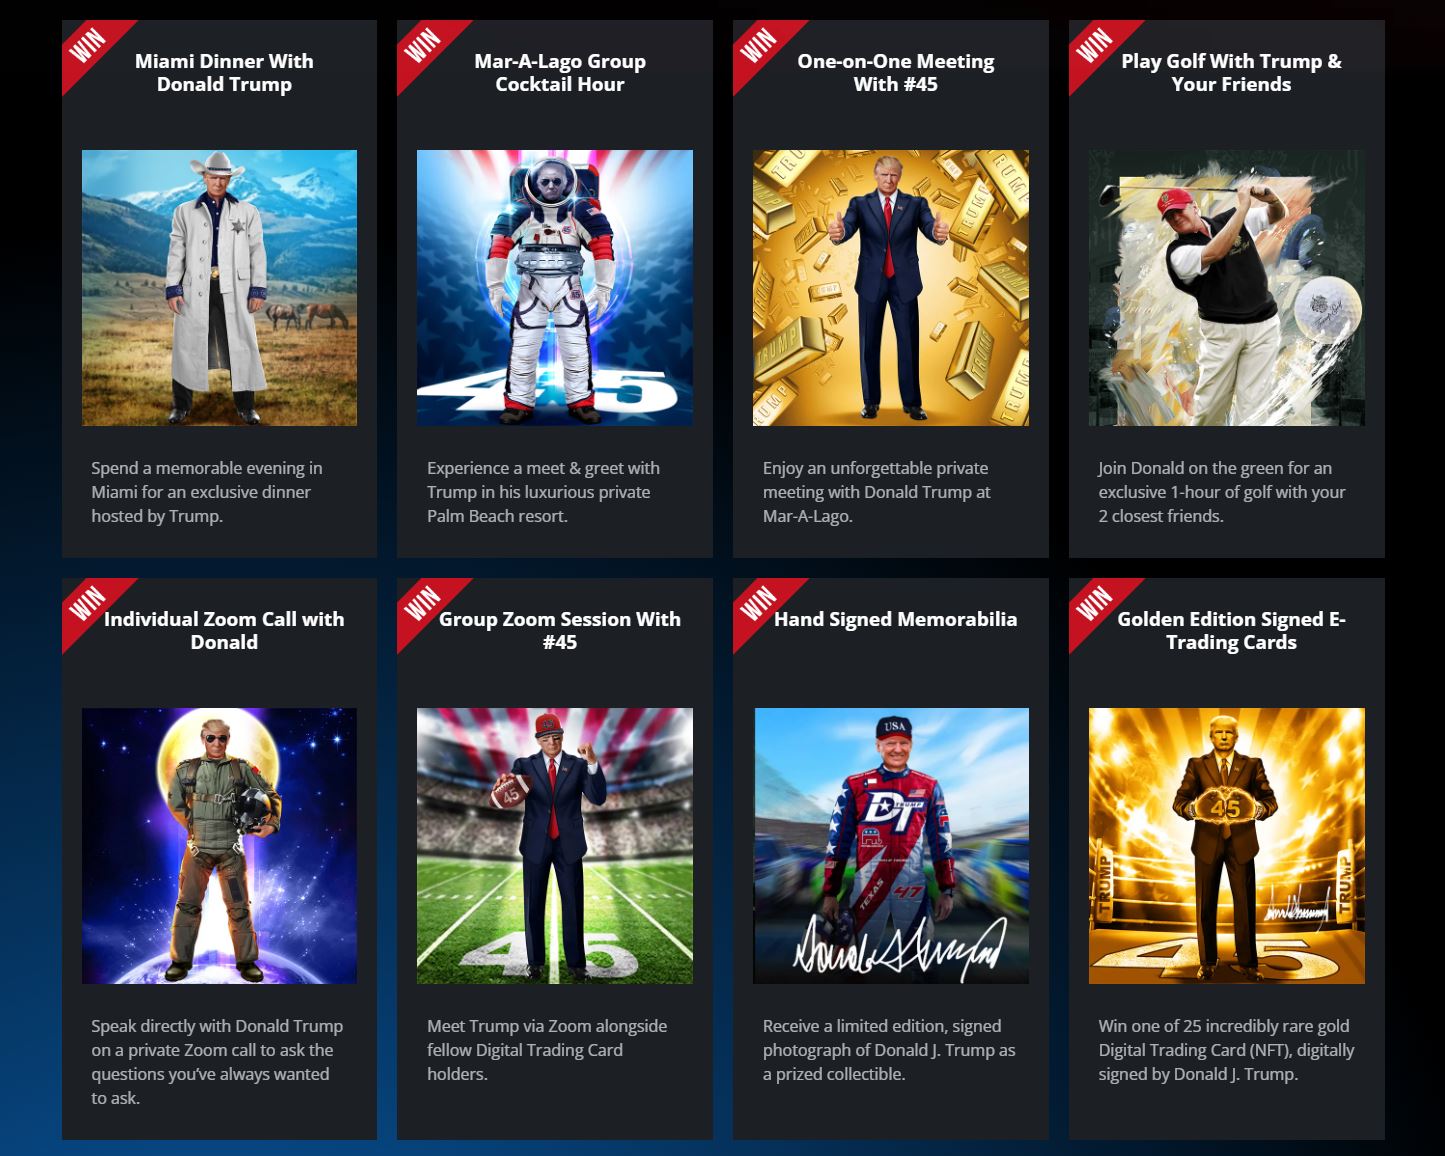 What Are Digital Trading Cards